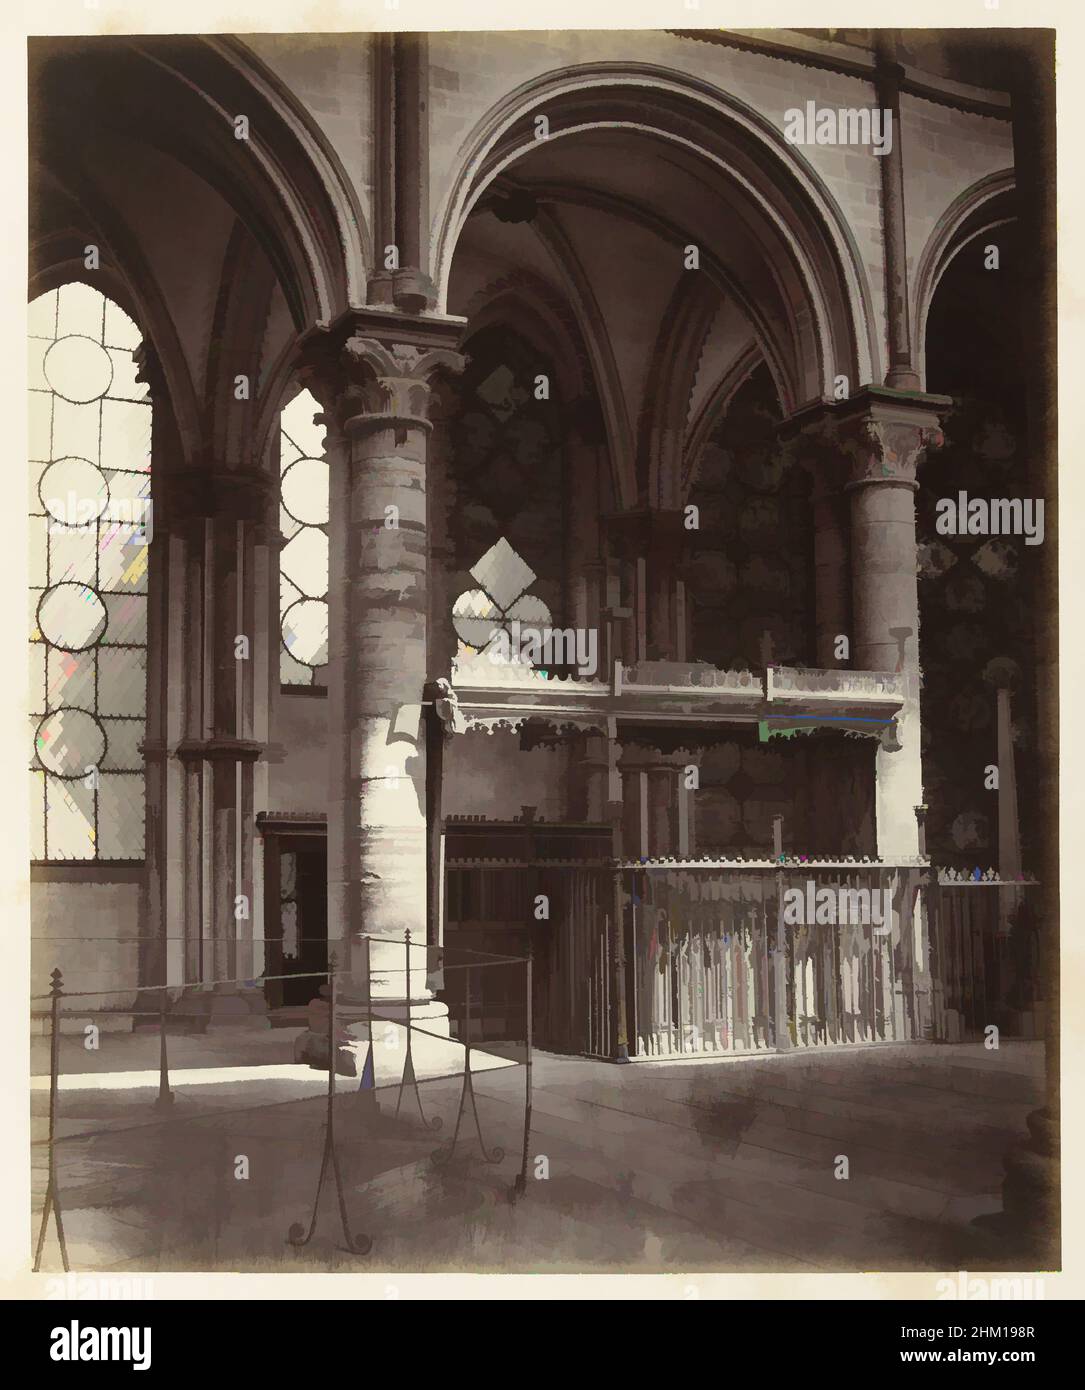 Art inspired by Interior of Canterbury Cathedral, Henry George Austin (attributed to), Canterbury, 1861, paper, cardboard, albumen print, height 286 mm × width 239 mmheight 396 mm × width 333 mm, Classic works modernized by Artotop with a splash of modernity. Shapes, color and value, eye-catching visual impact on art. Emotions through freedom of artworks in a contemporary way. A timeless message pursuing a wildly creative new direction. Artists turning to the digital medium and creating the Artotop NFT Stock Photo